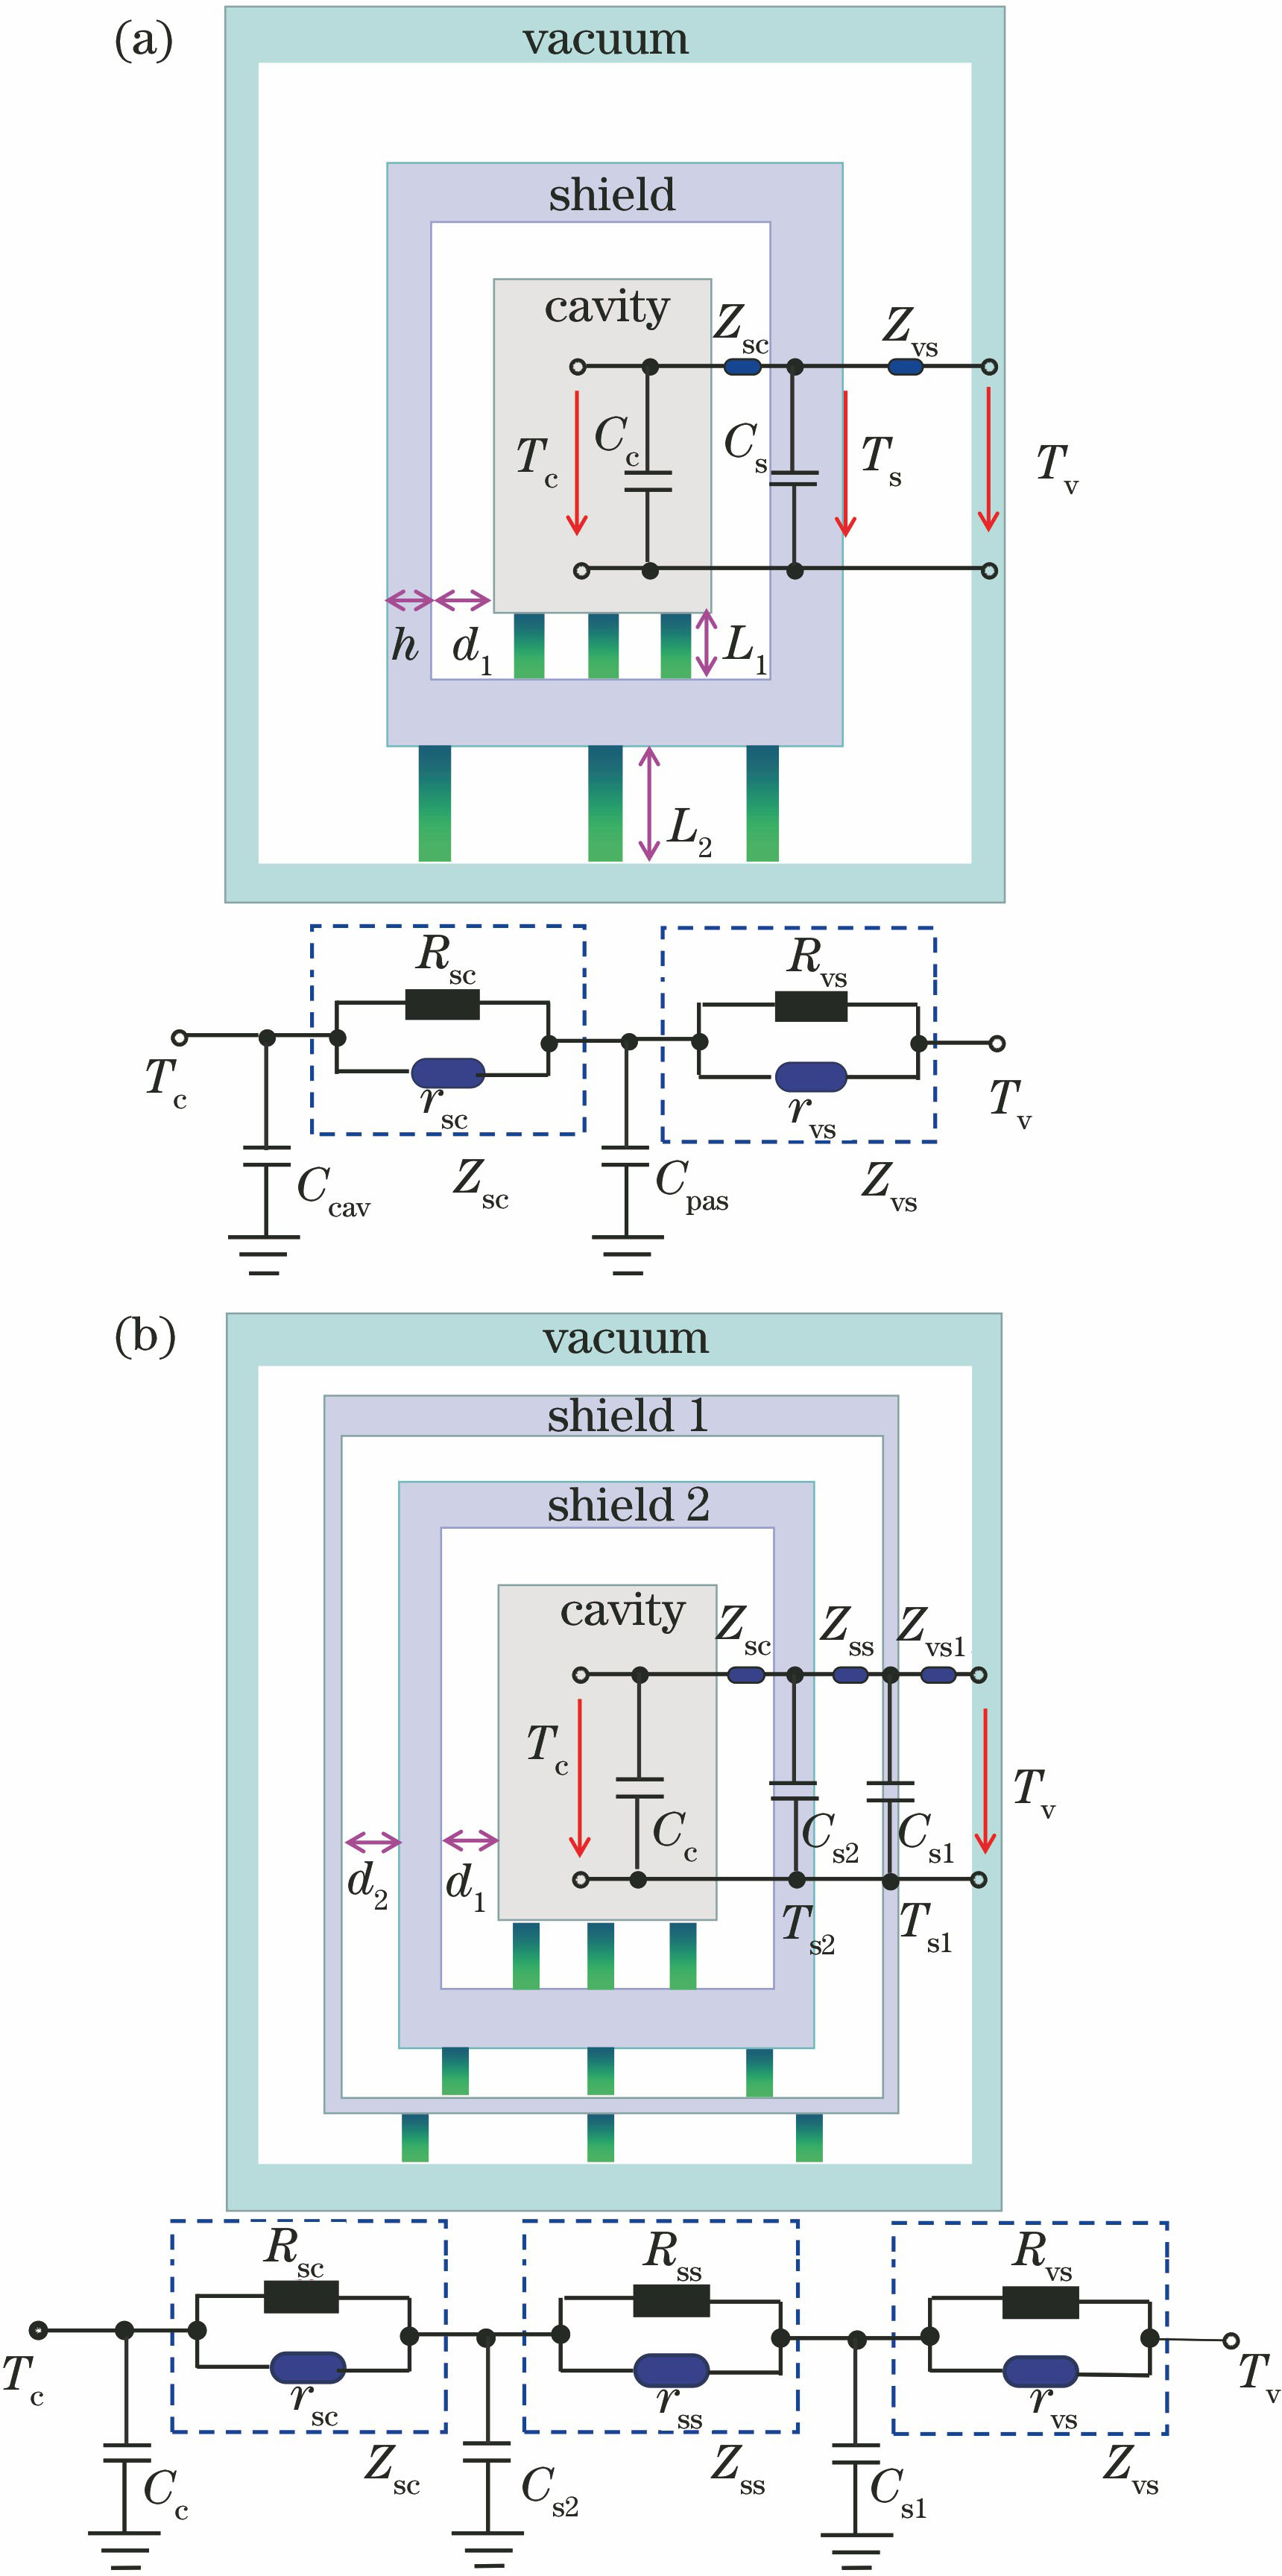 (a) Schematic diagram of a cavity system with a single layer of thermal shield and the equivalent multilevel RC integrating circuit; (b) schematic diagram of a cavity system with two layers of thermal shields and the equivalent RC multilevel integrating circuit